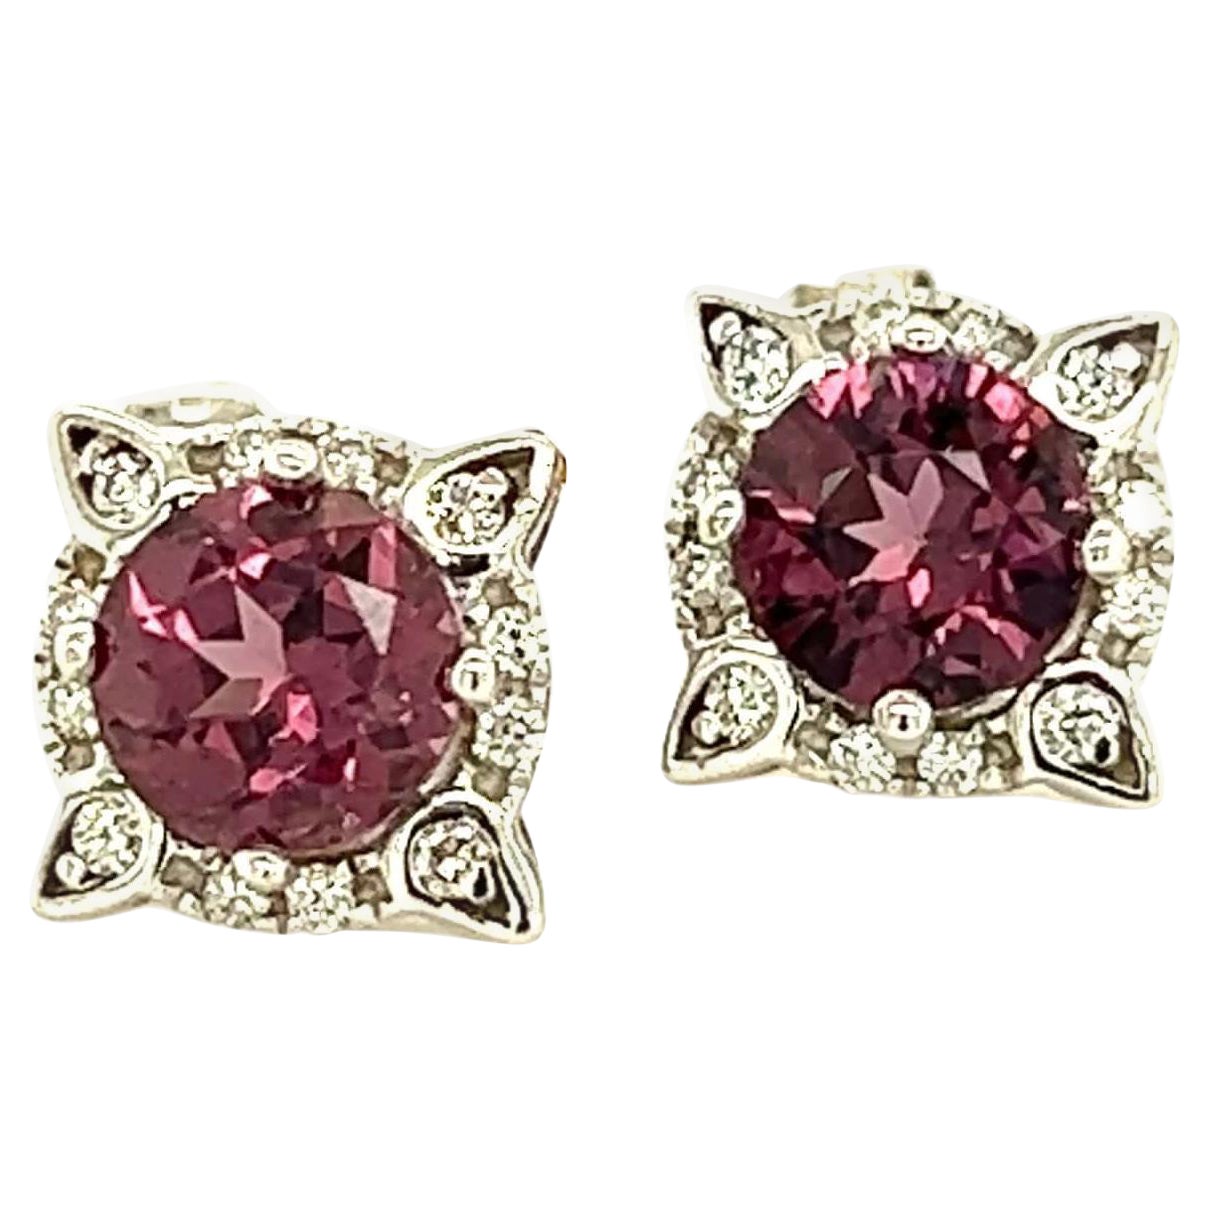 Natural Spinel Diamond Earrings 14k Y Gold 2.04 TCW Certified 